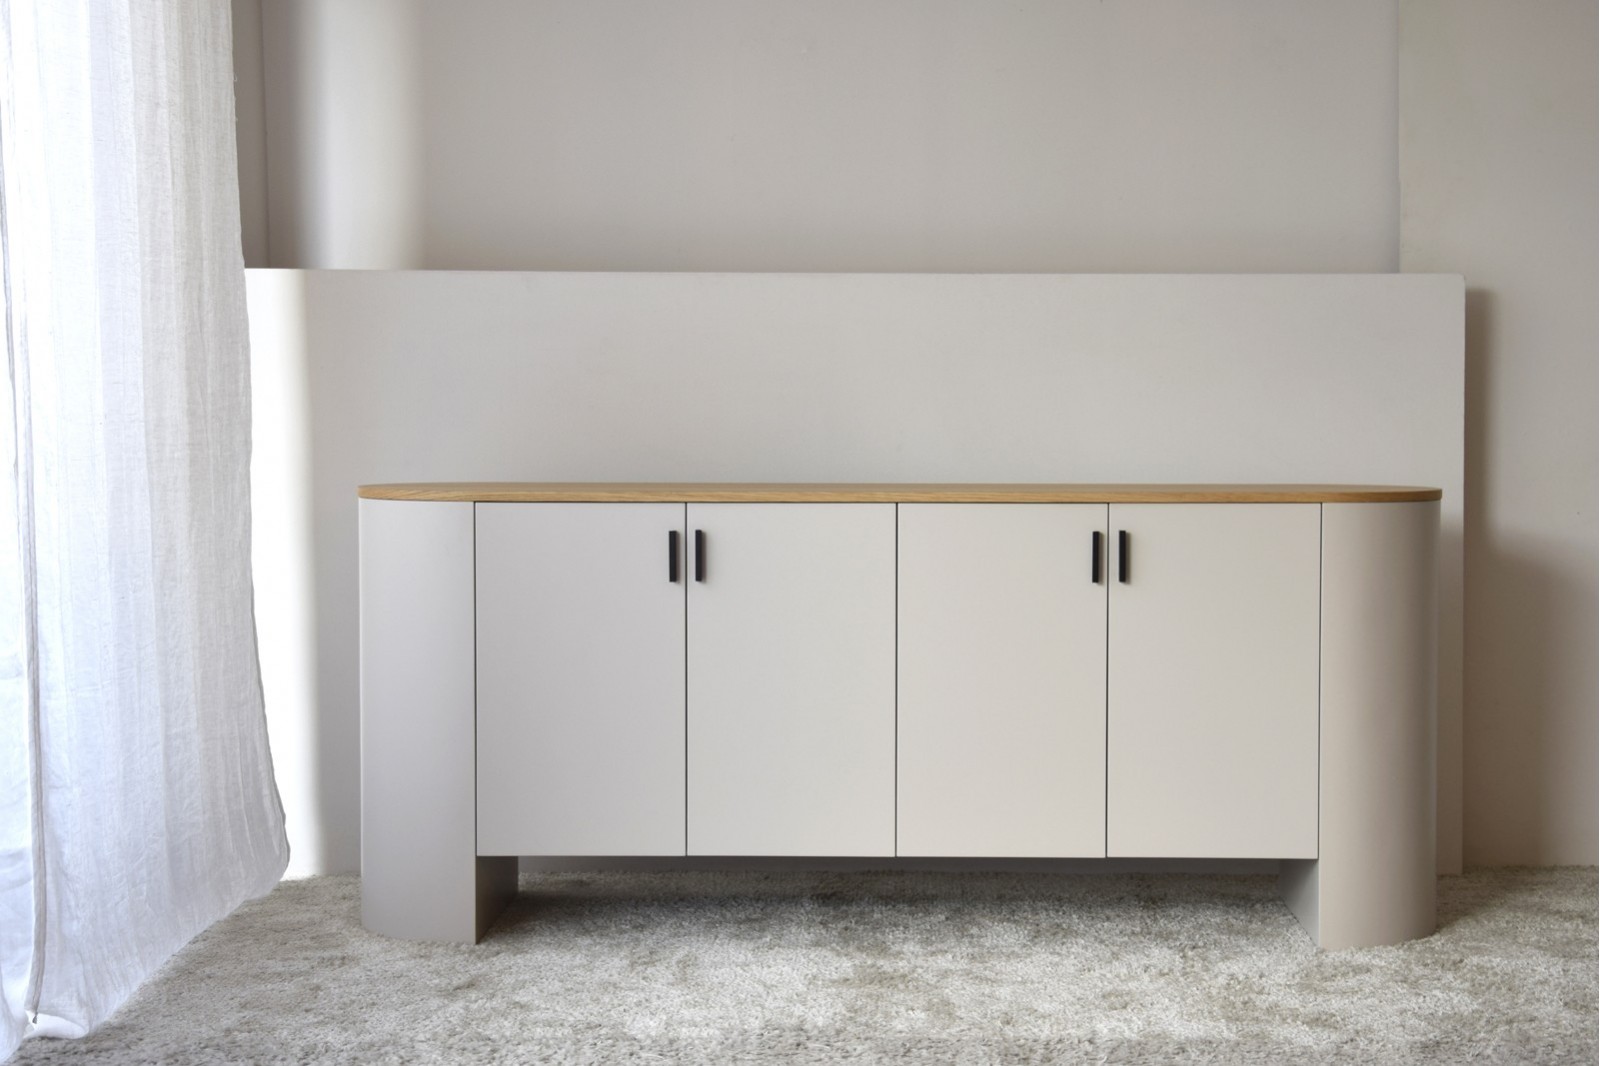 TEA COLECTION.SIDEBOARD SAND GREY AND OAK